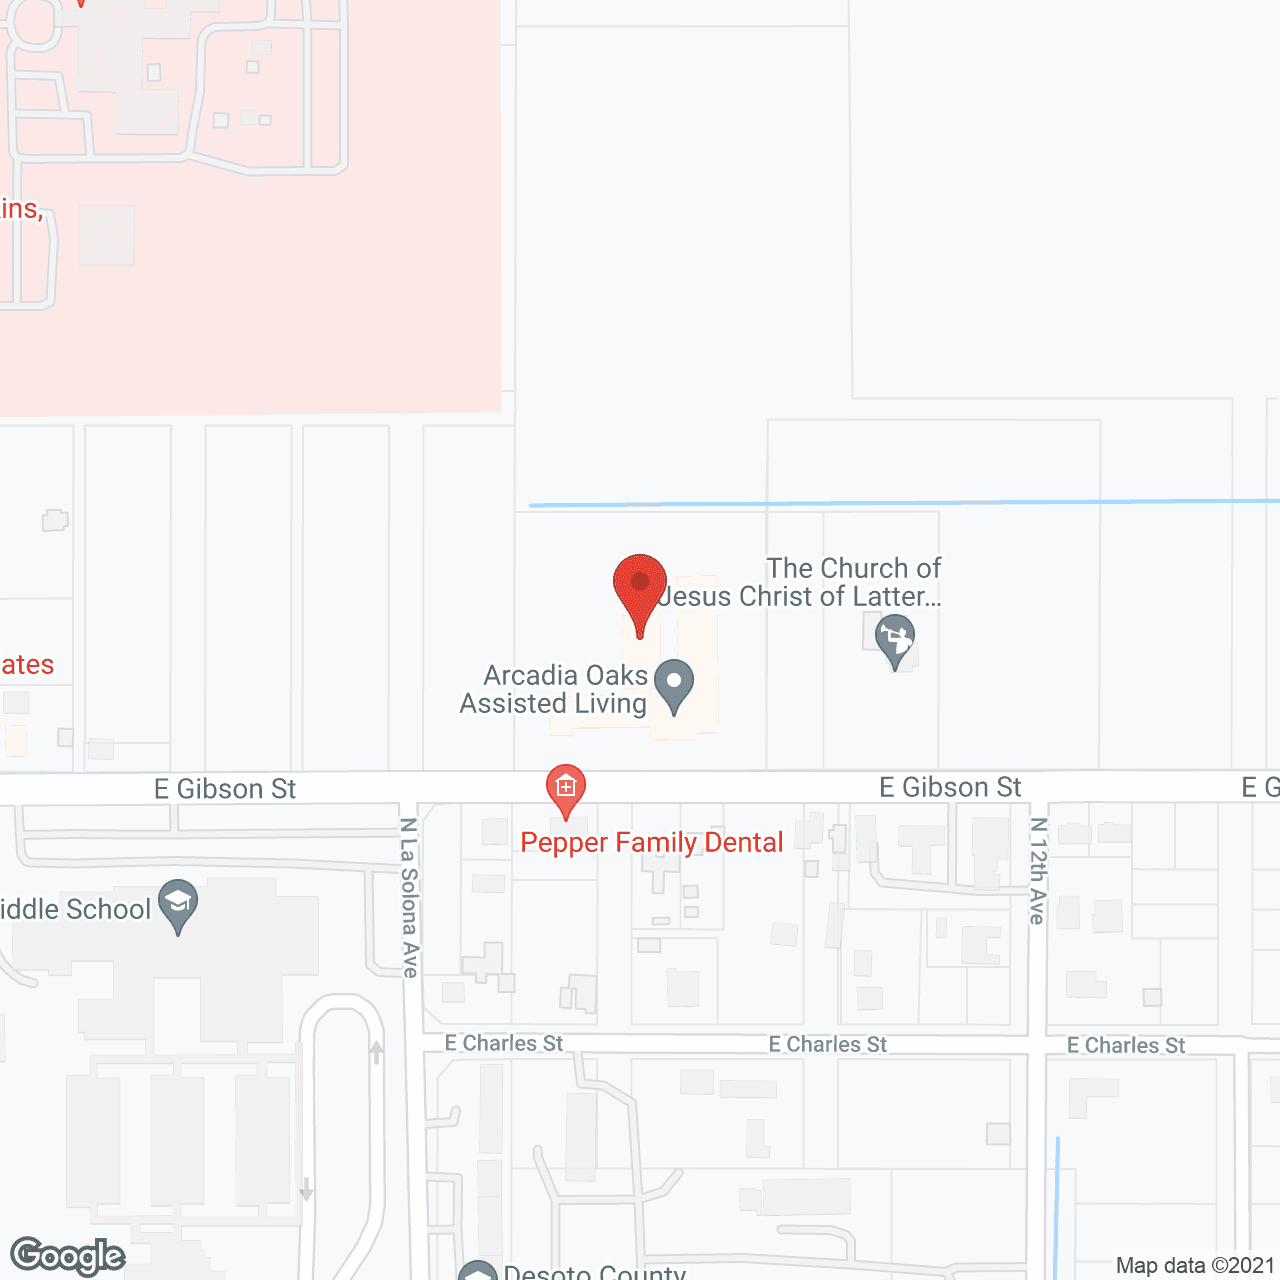 Arcadia Oaks Assisted Living in google map